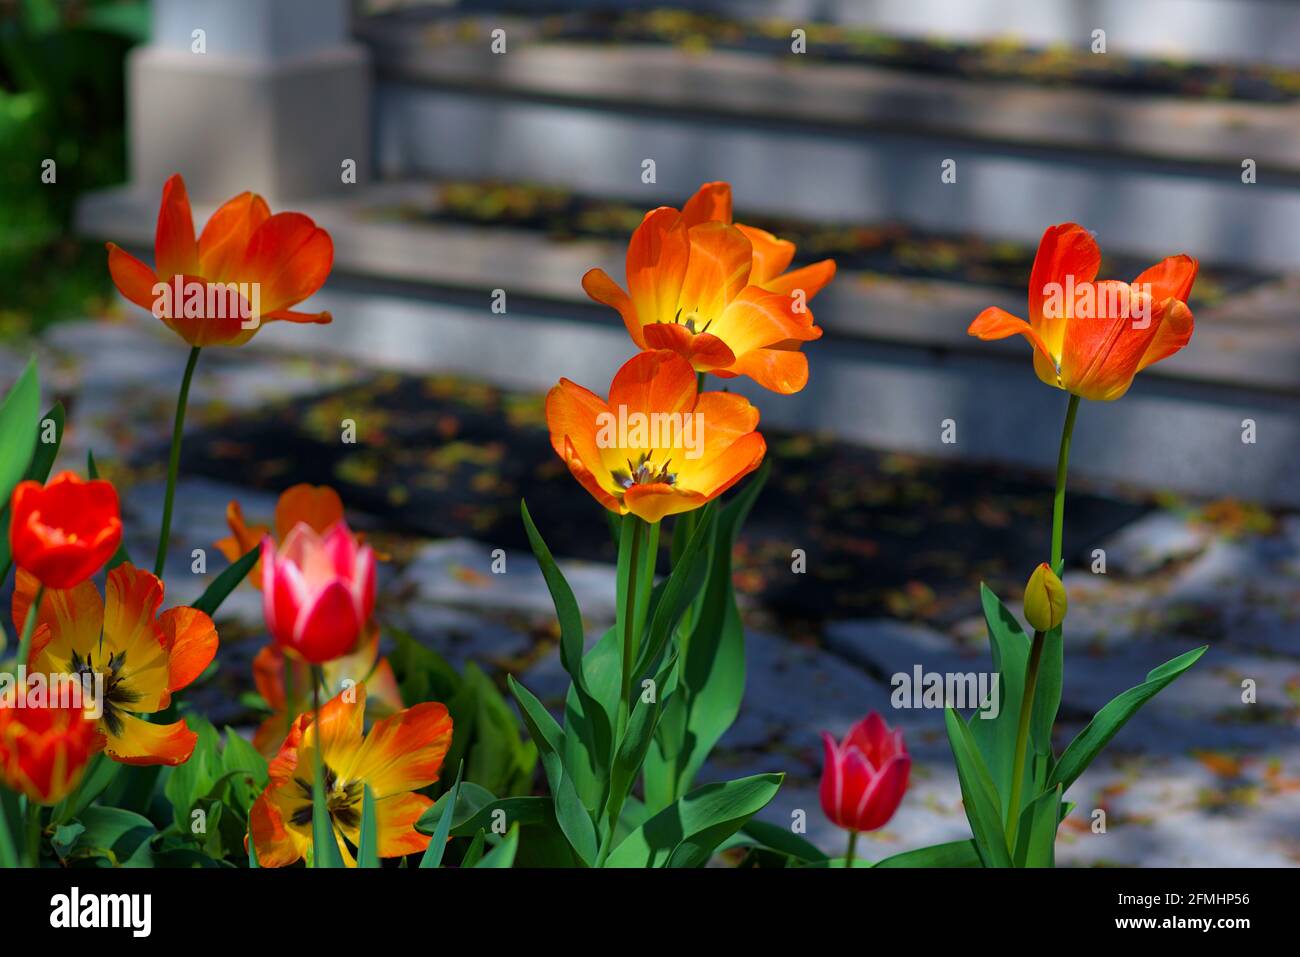 Orange and red tulips (unknown cultivar) blooming in a Glebe garden in late spring in Ottawa, Ontario, Canada. Stock Photo